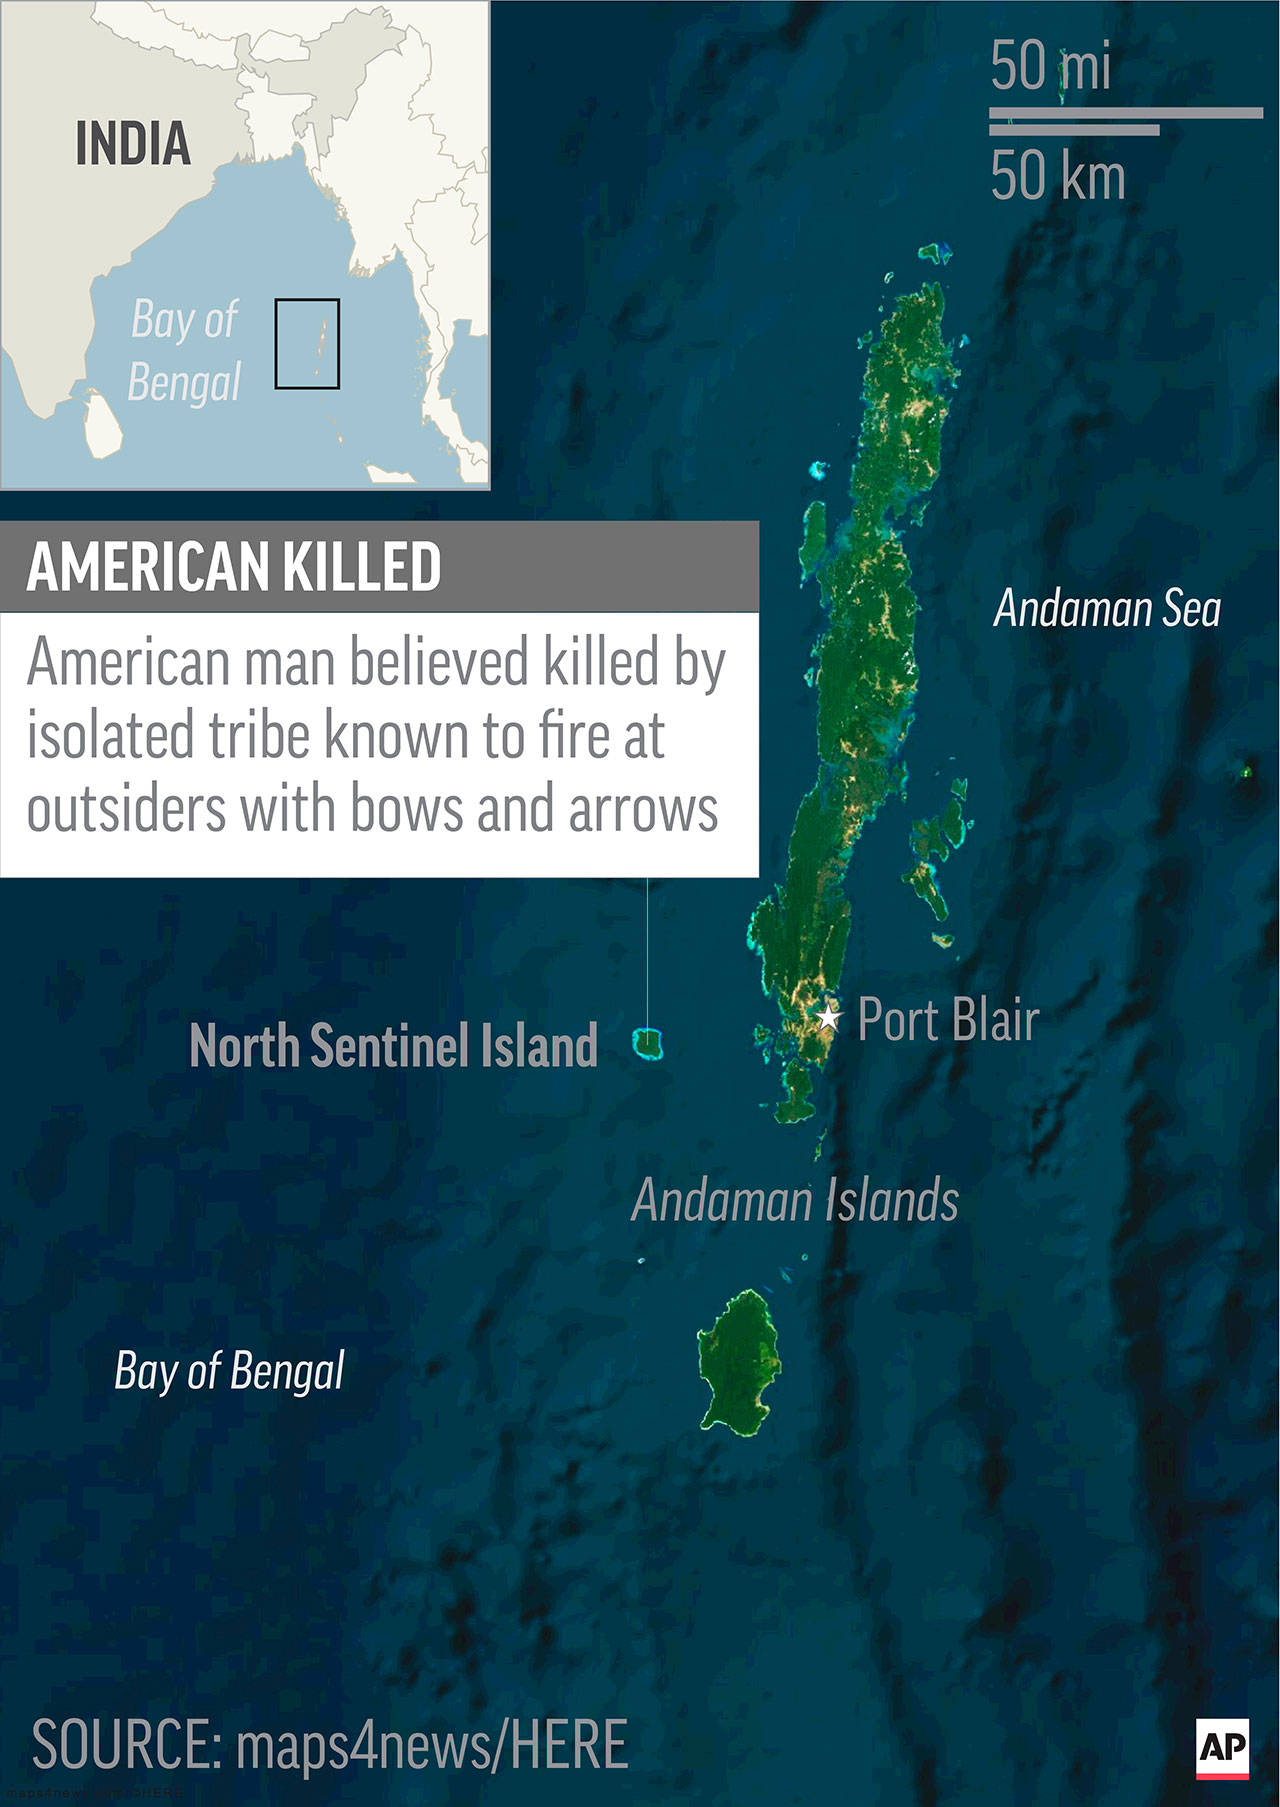 India studying island to see if man’s body can be recovered